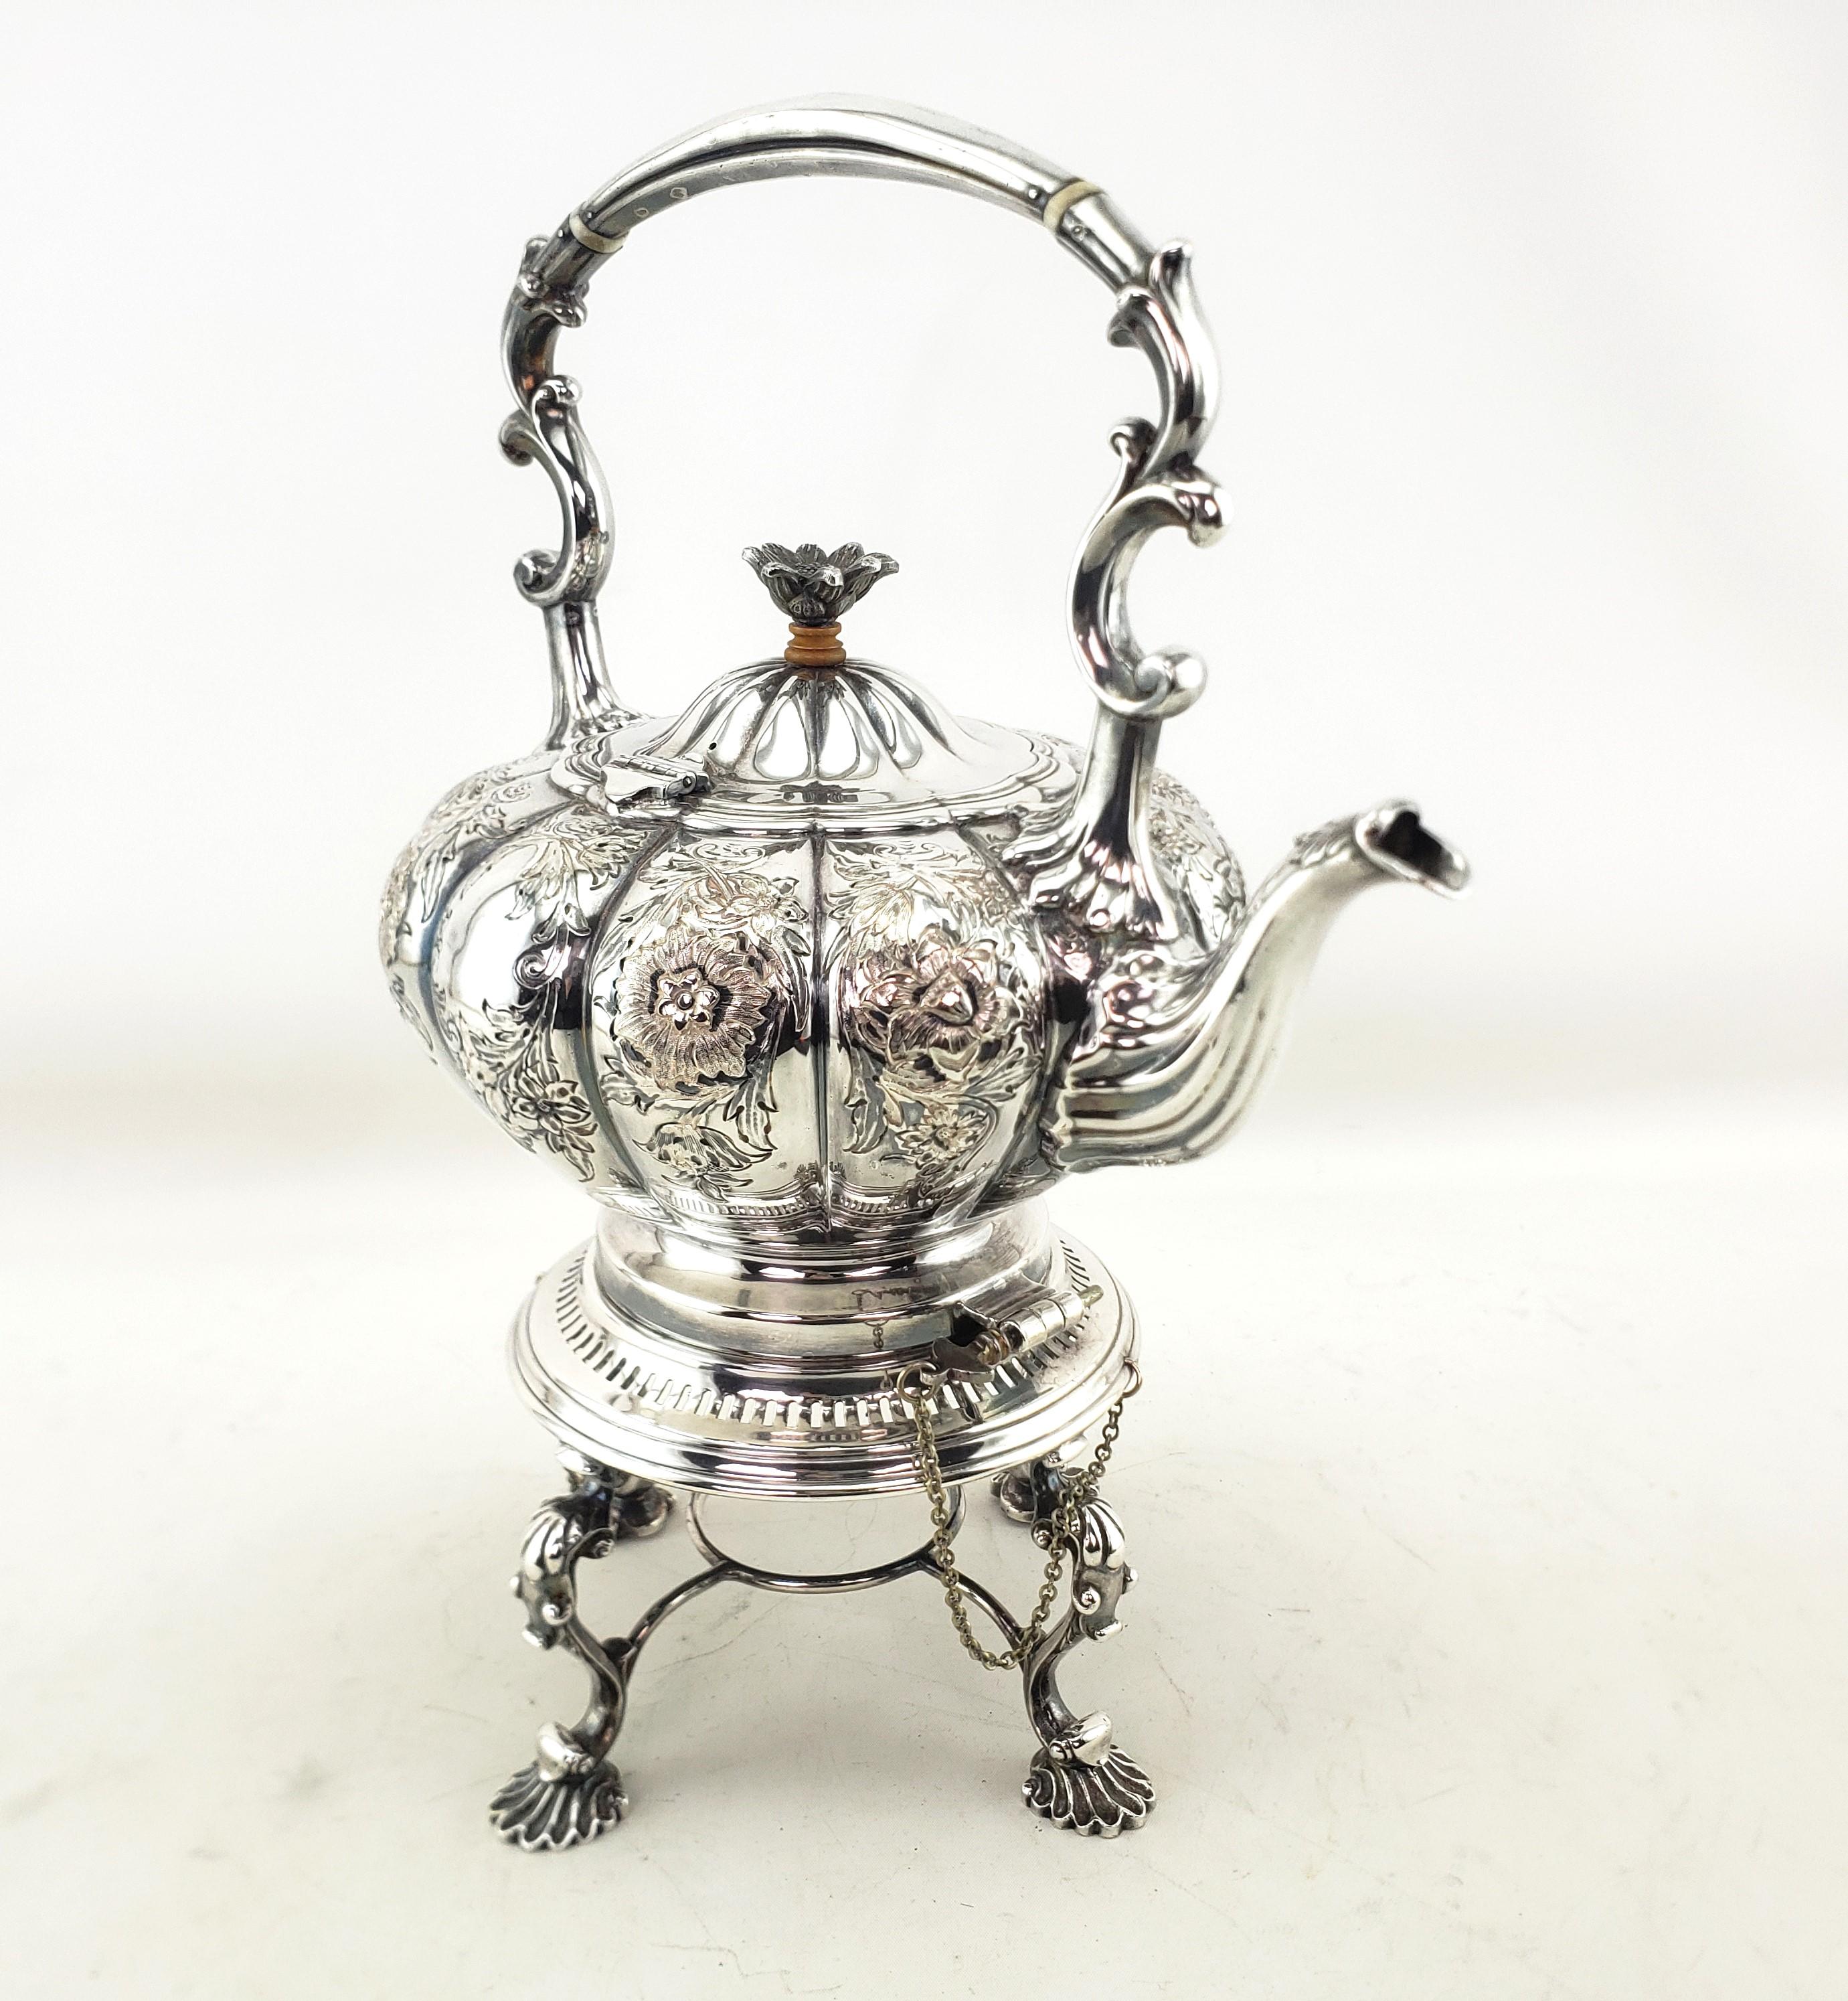 Machine-Made Antique English Silver Plated Tipping Hot Water Kettle with Chased Floral Motif For Sale